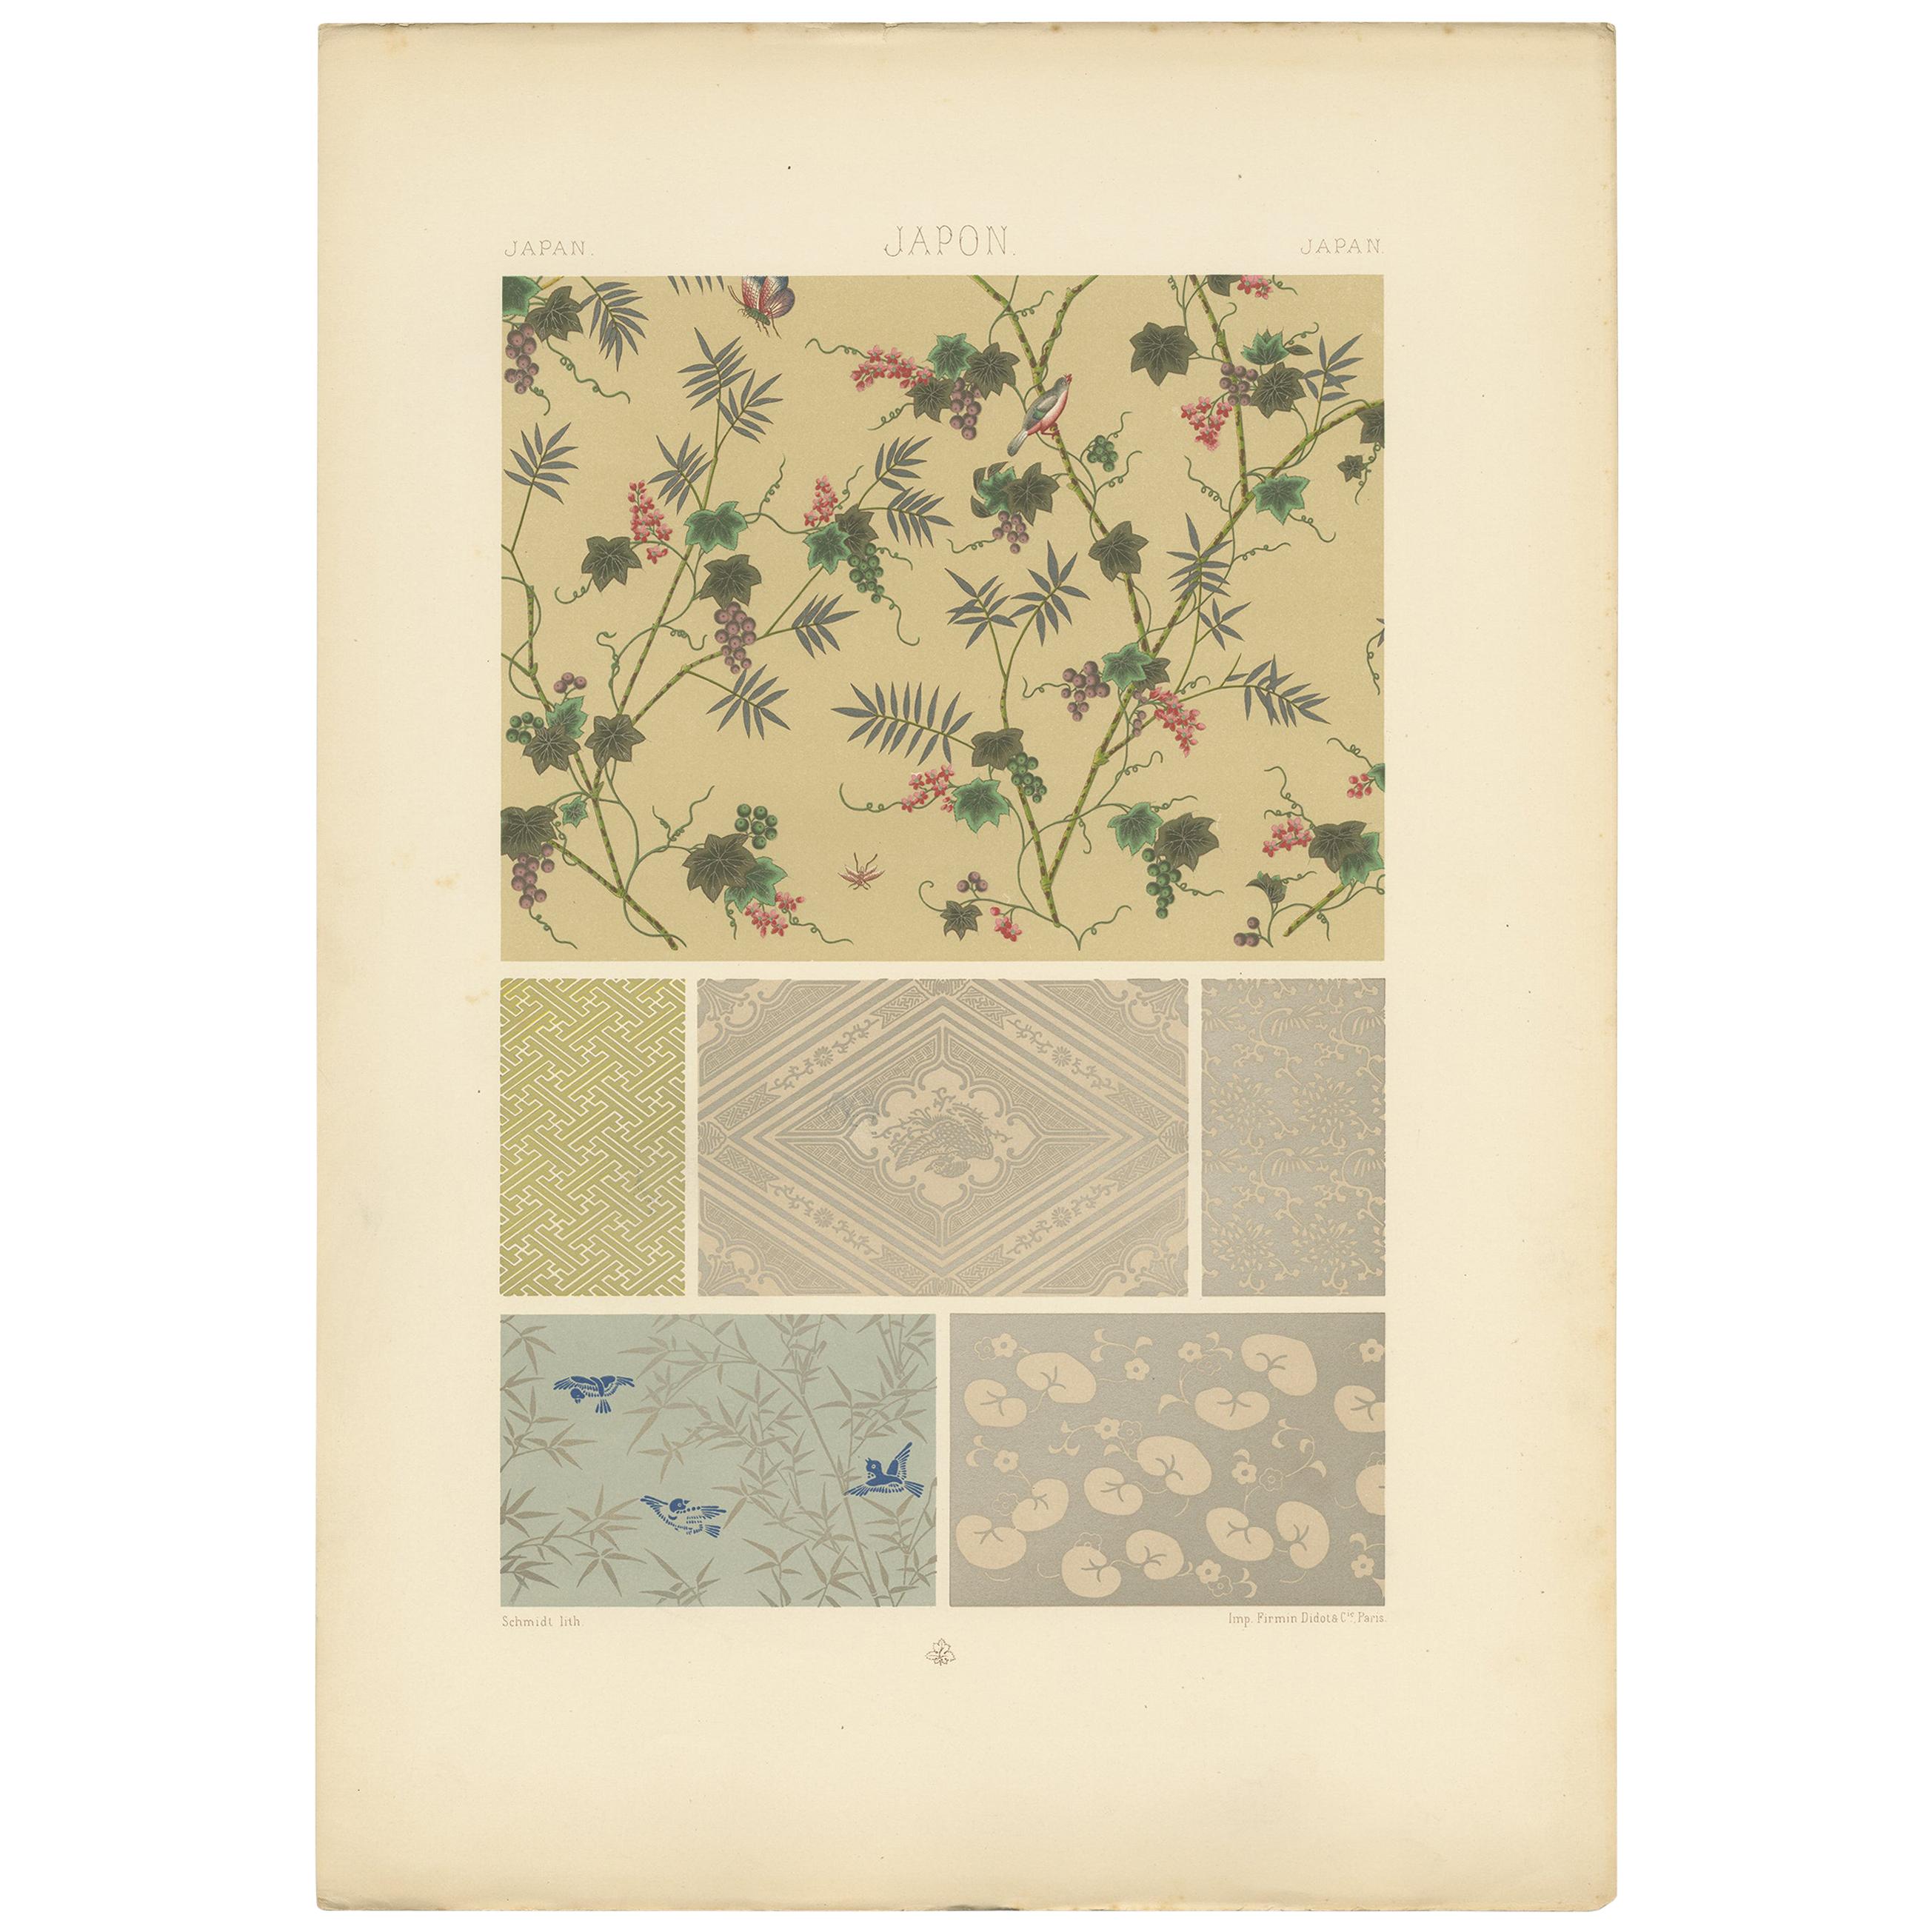 Pl. 14 Antique Print of Japanese Printed Wallpapers by Racinet, 'circa 1890'